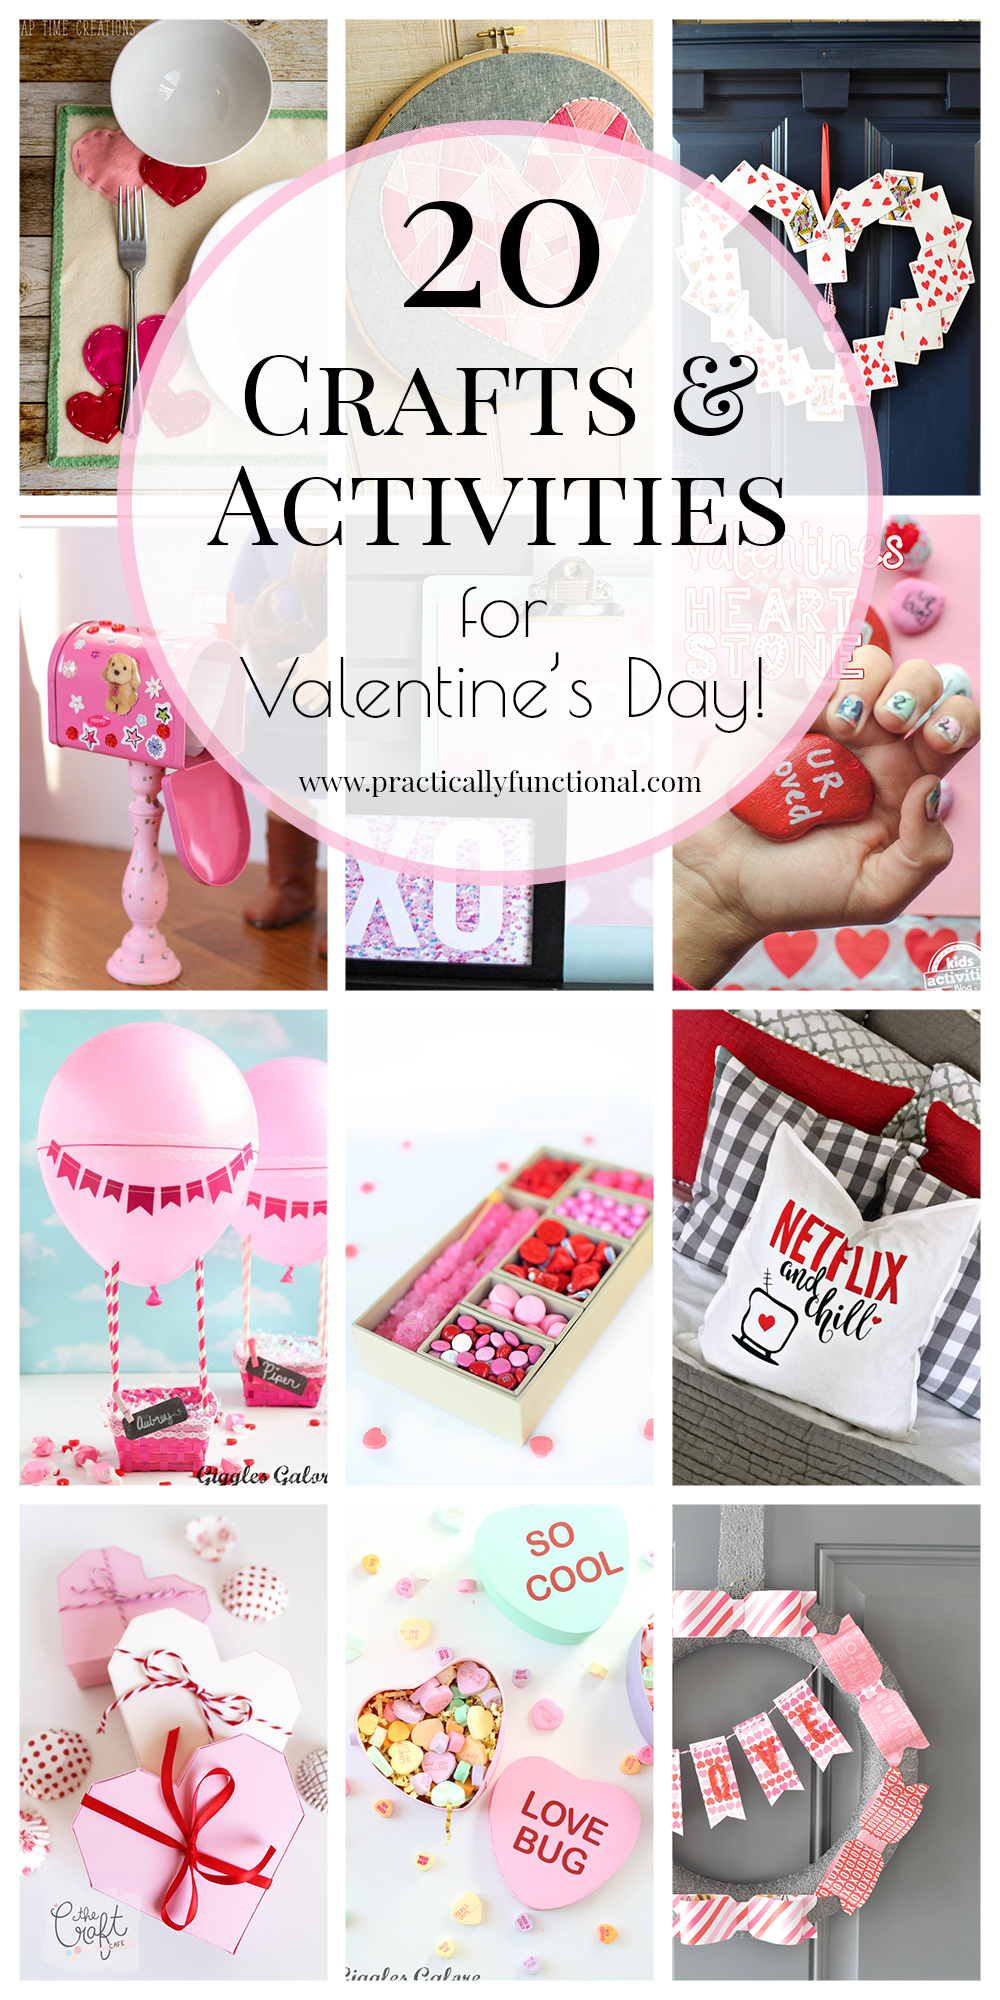 20 fun valentines crafts and activities to celebrate the holiday!